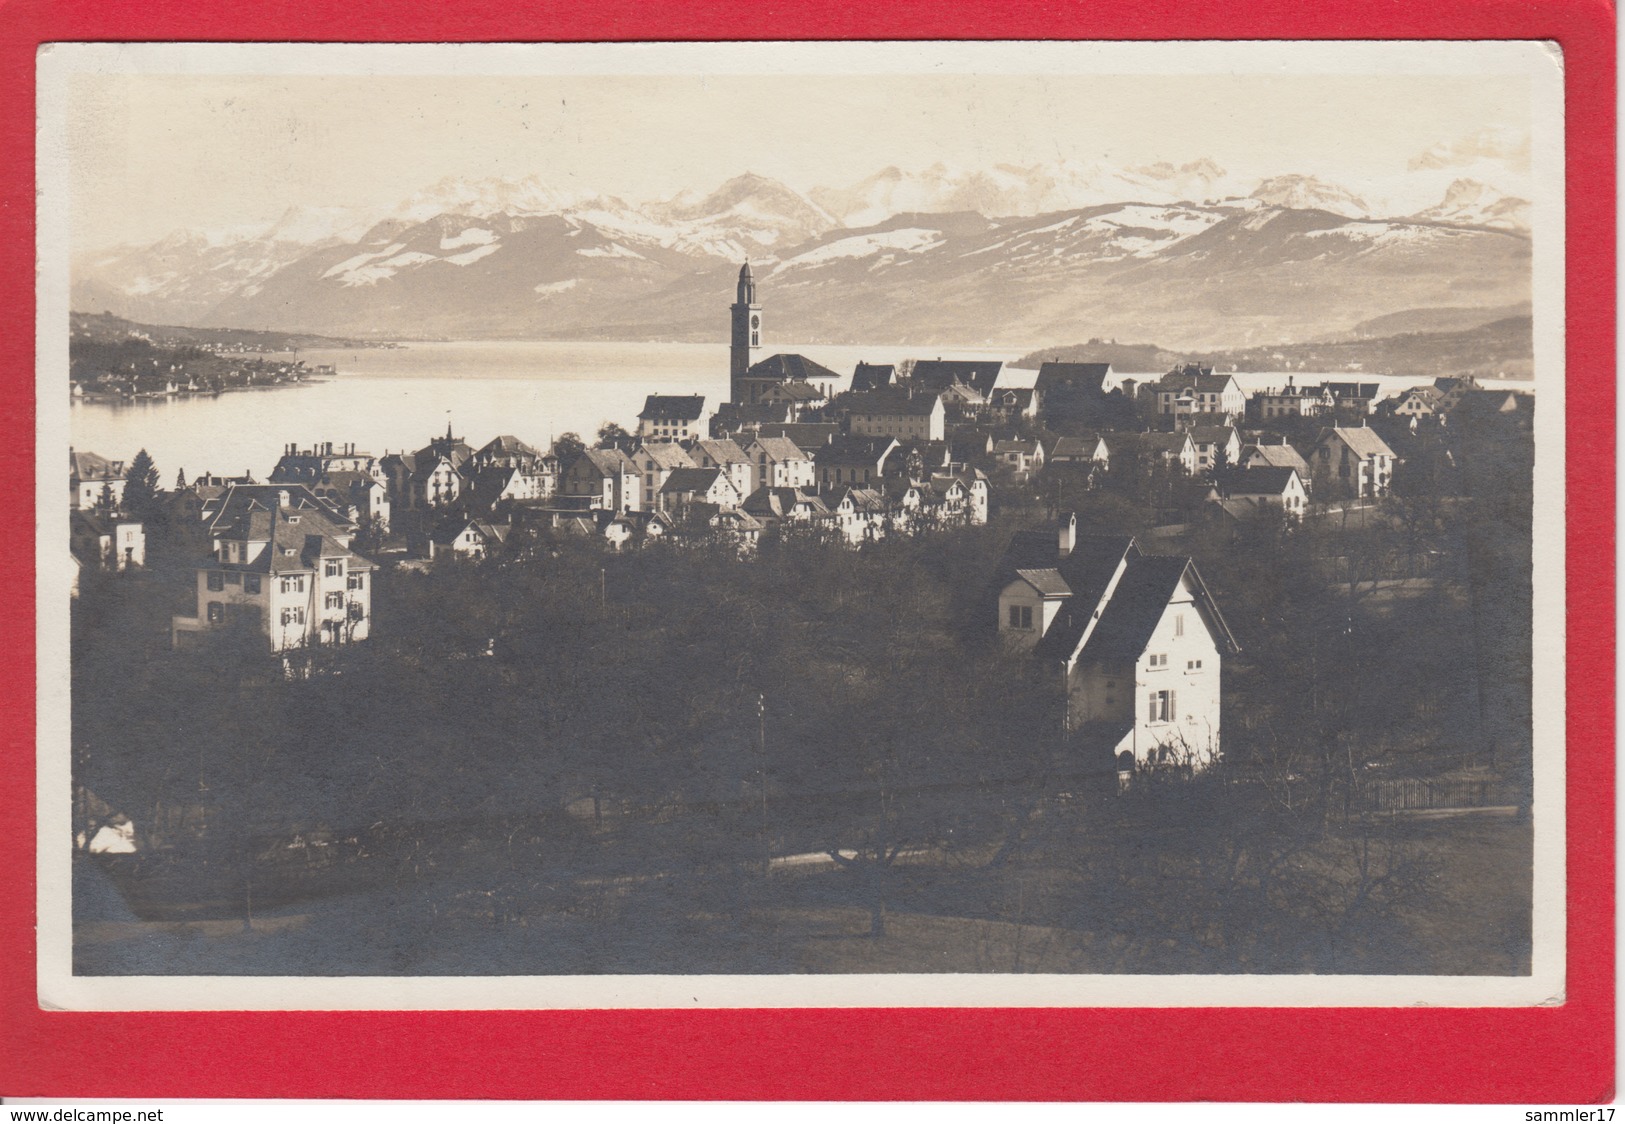 THALWIL, 1920 - Thalwil